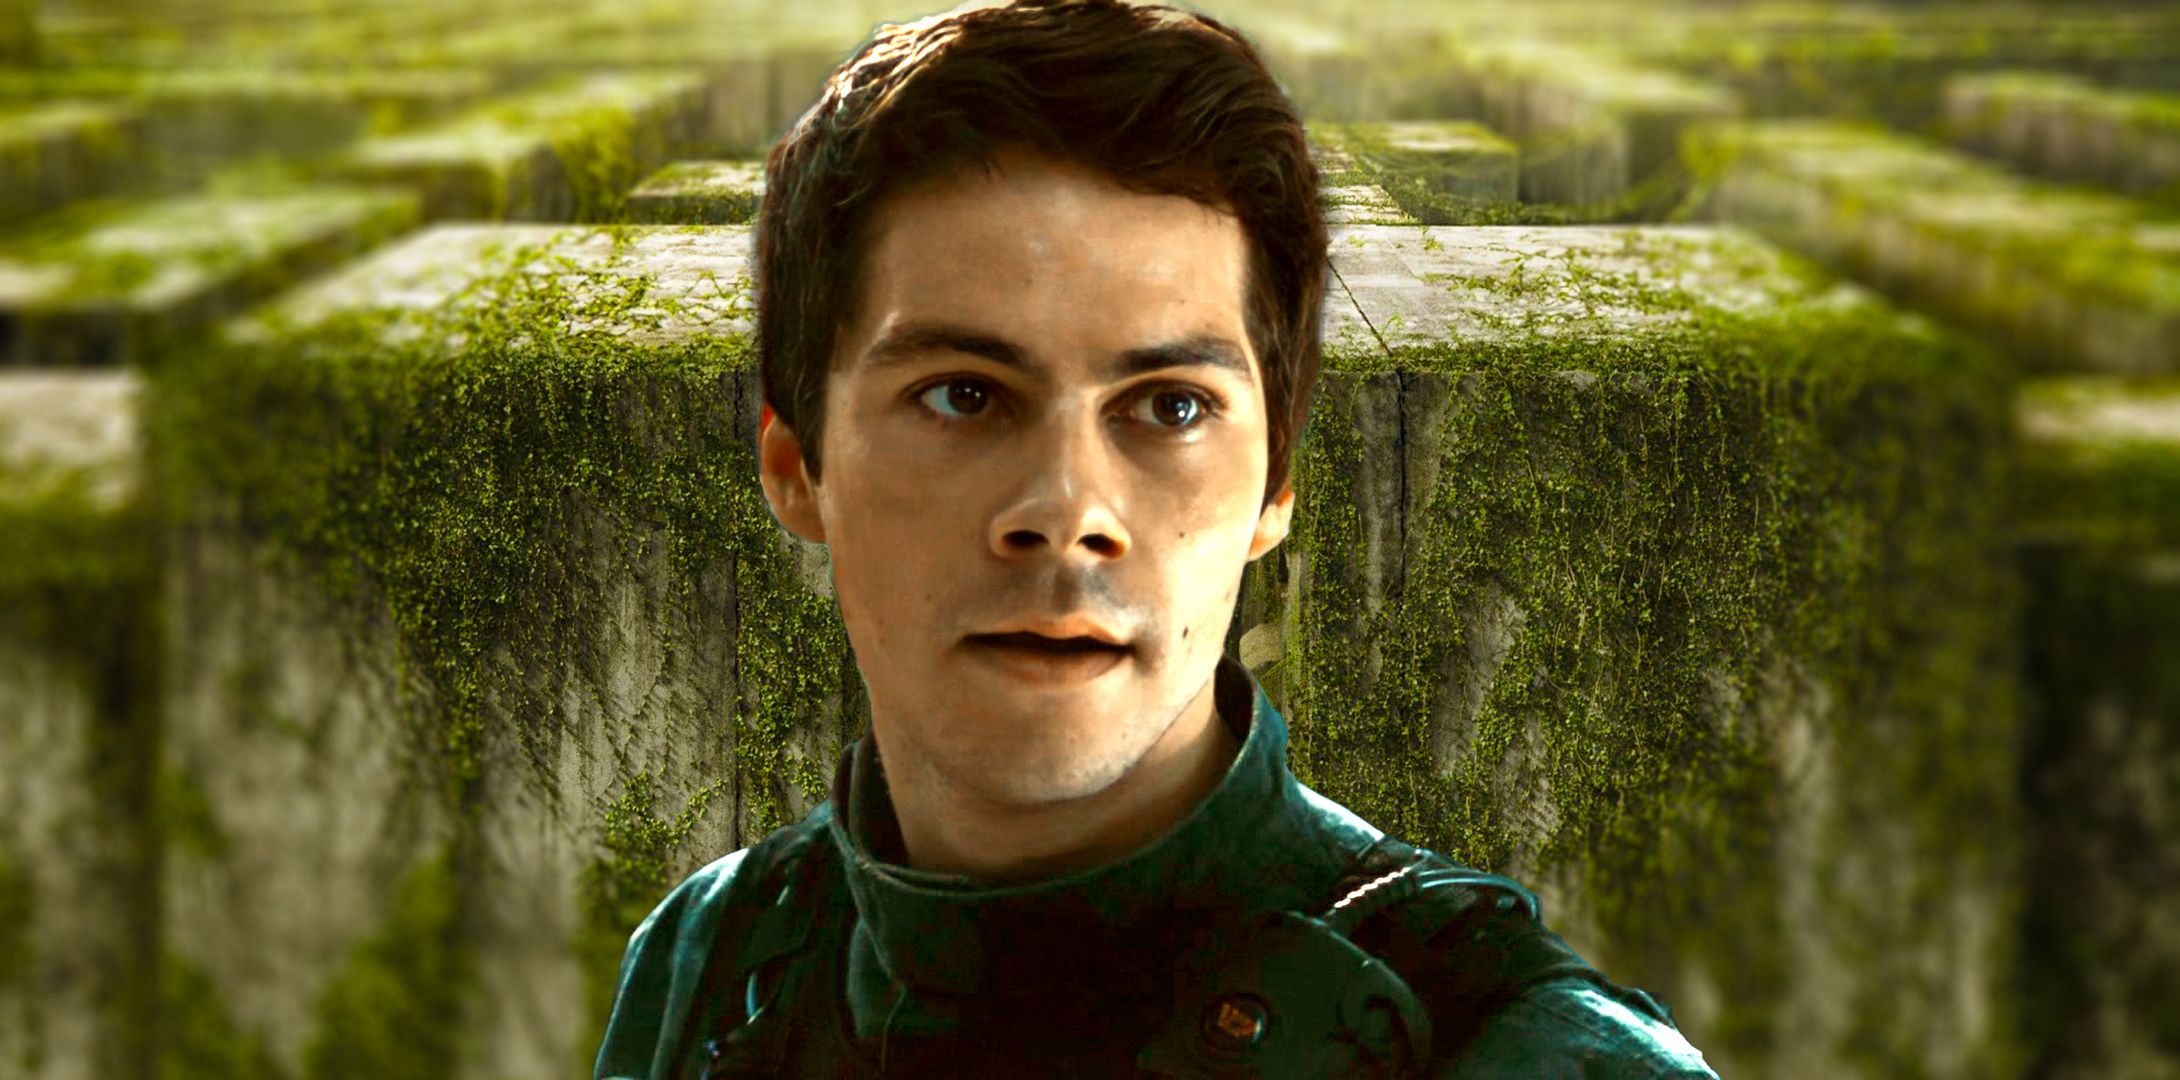 Dylan O'Brien as Thomas against The Maze Runner background